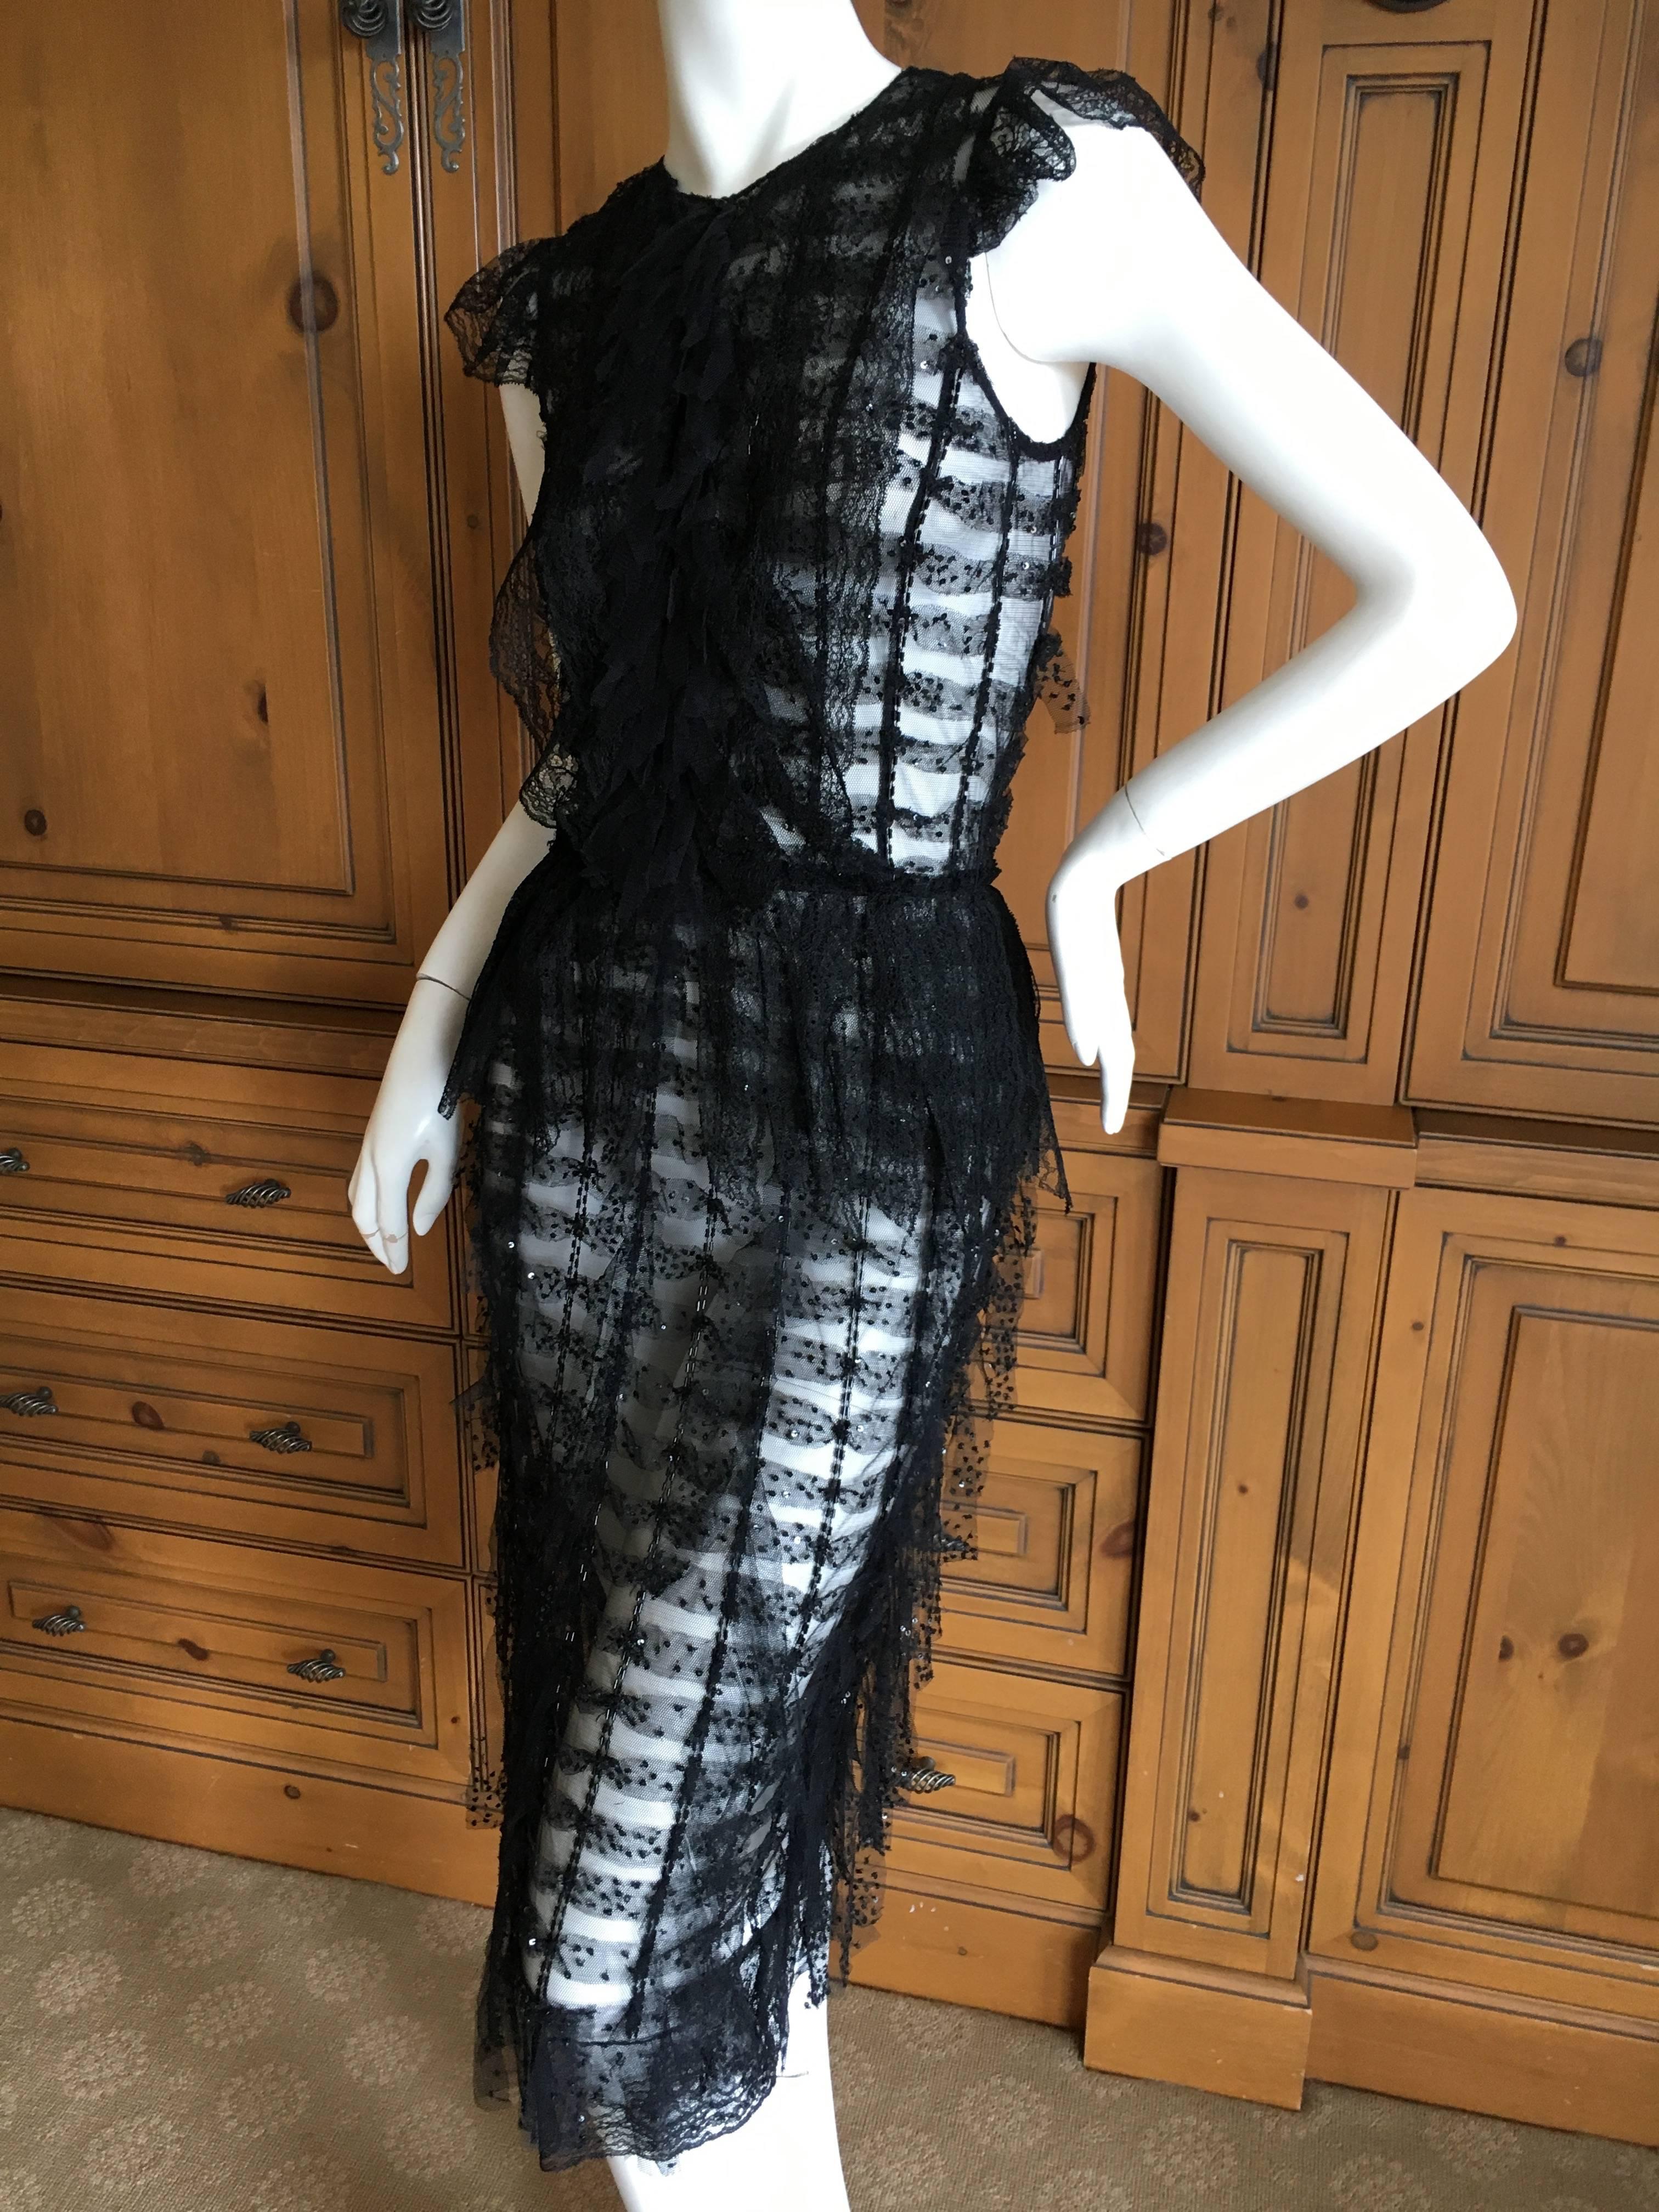 Oscar de la Renta Sheer Black Bugle Bead Embellished Cocktail Dress with Slip.
This is so pretty. The slip can be worn separately , and the dress is sheer, it would look amazing with just sexy black undergarments.
Size 2
Bust 36"
Waist